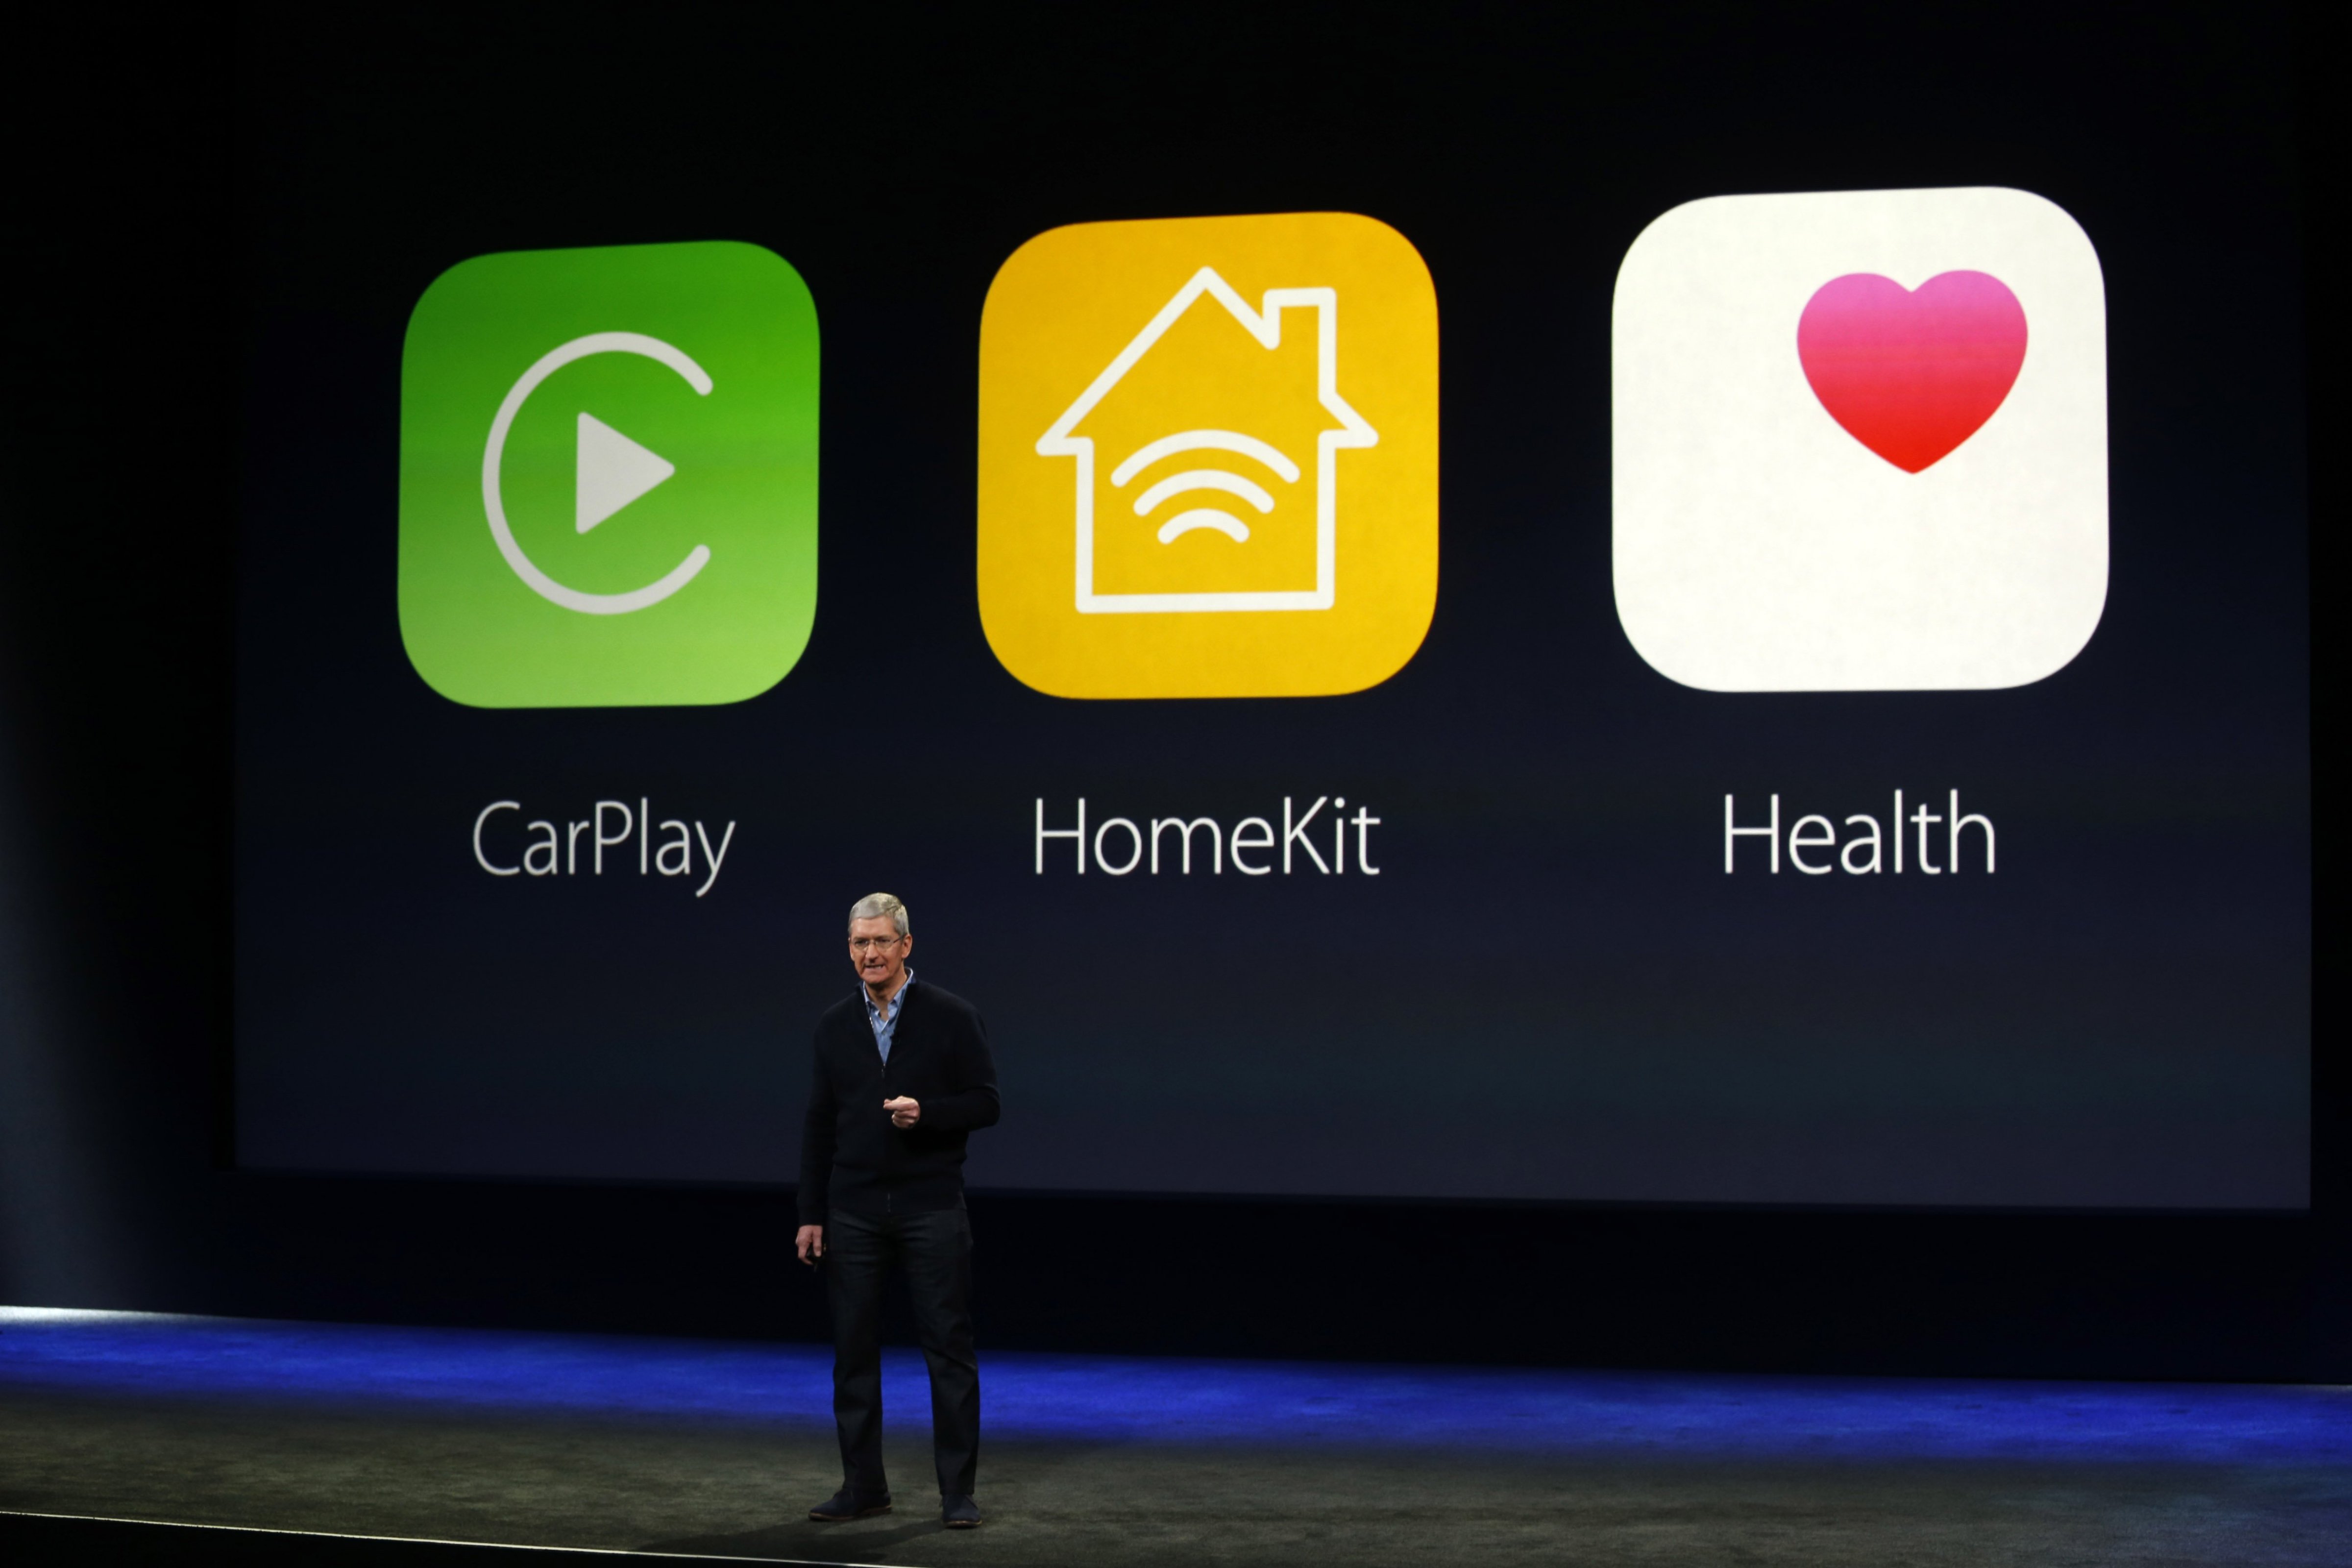 Apple CEO Tim Cook speaks on stage during an Apple special event at the Yerba Buena Center for the Arts on March 9, 2015 in San Francisco. (Stephen Lam—Getty Images)